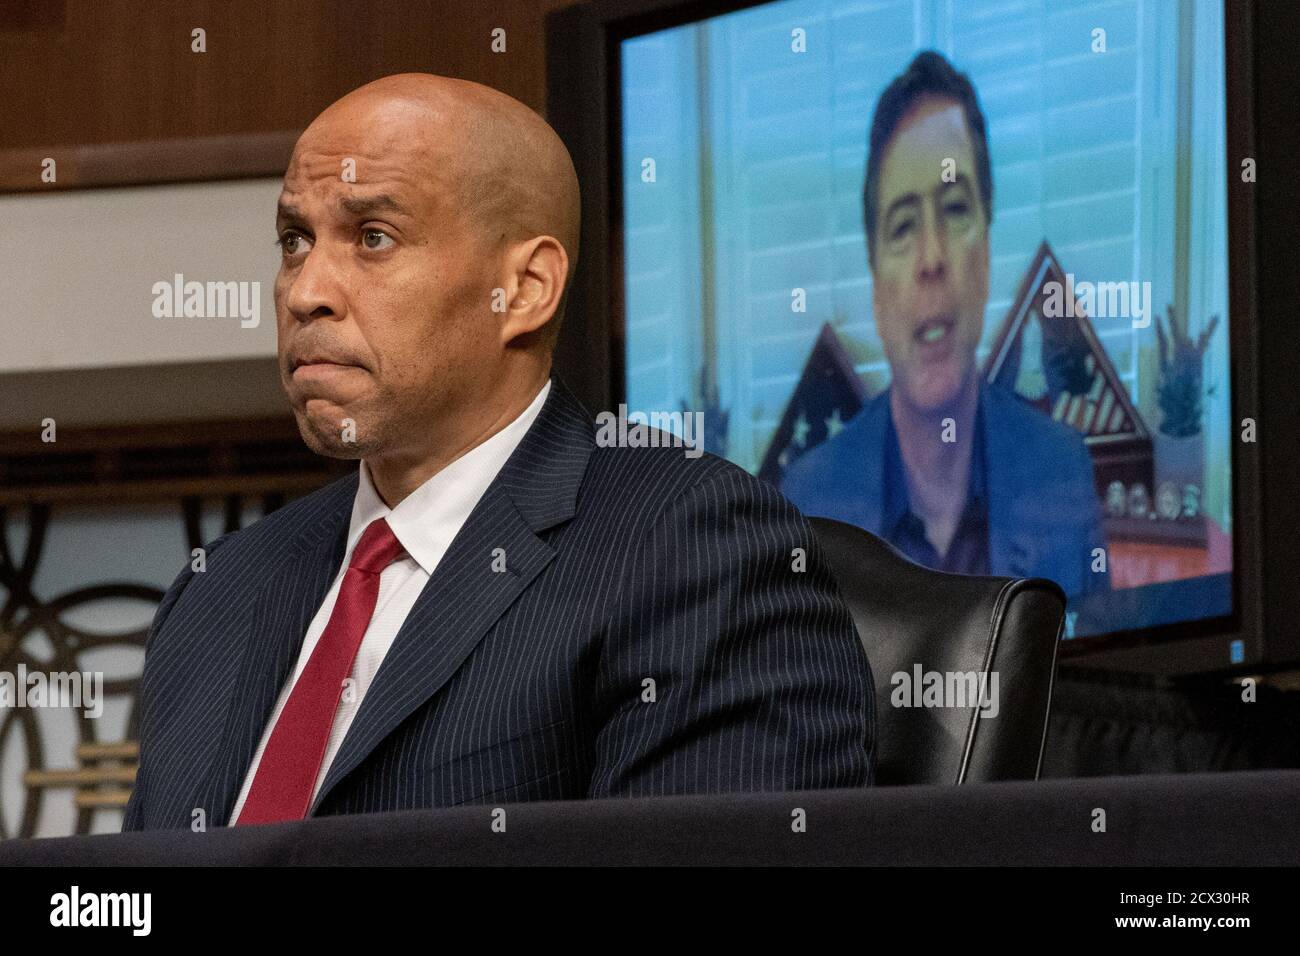 Washington, United States. 30th Sep, 2020. U.S. Sen. Cory Booker (D-NJ) asks questions to former FBI Director James Come as he testifies remotely before the Senate Judiciary Committee during an oversight hearing to examine the Crossfire Hurricane Investigation in Washington DC., on Wednesday, September 30, 2020. Photo by Ken Cedeno/UPI Credit: UPI/Alamy Live News Stock Photo